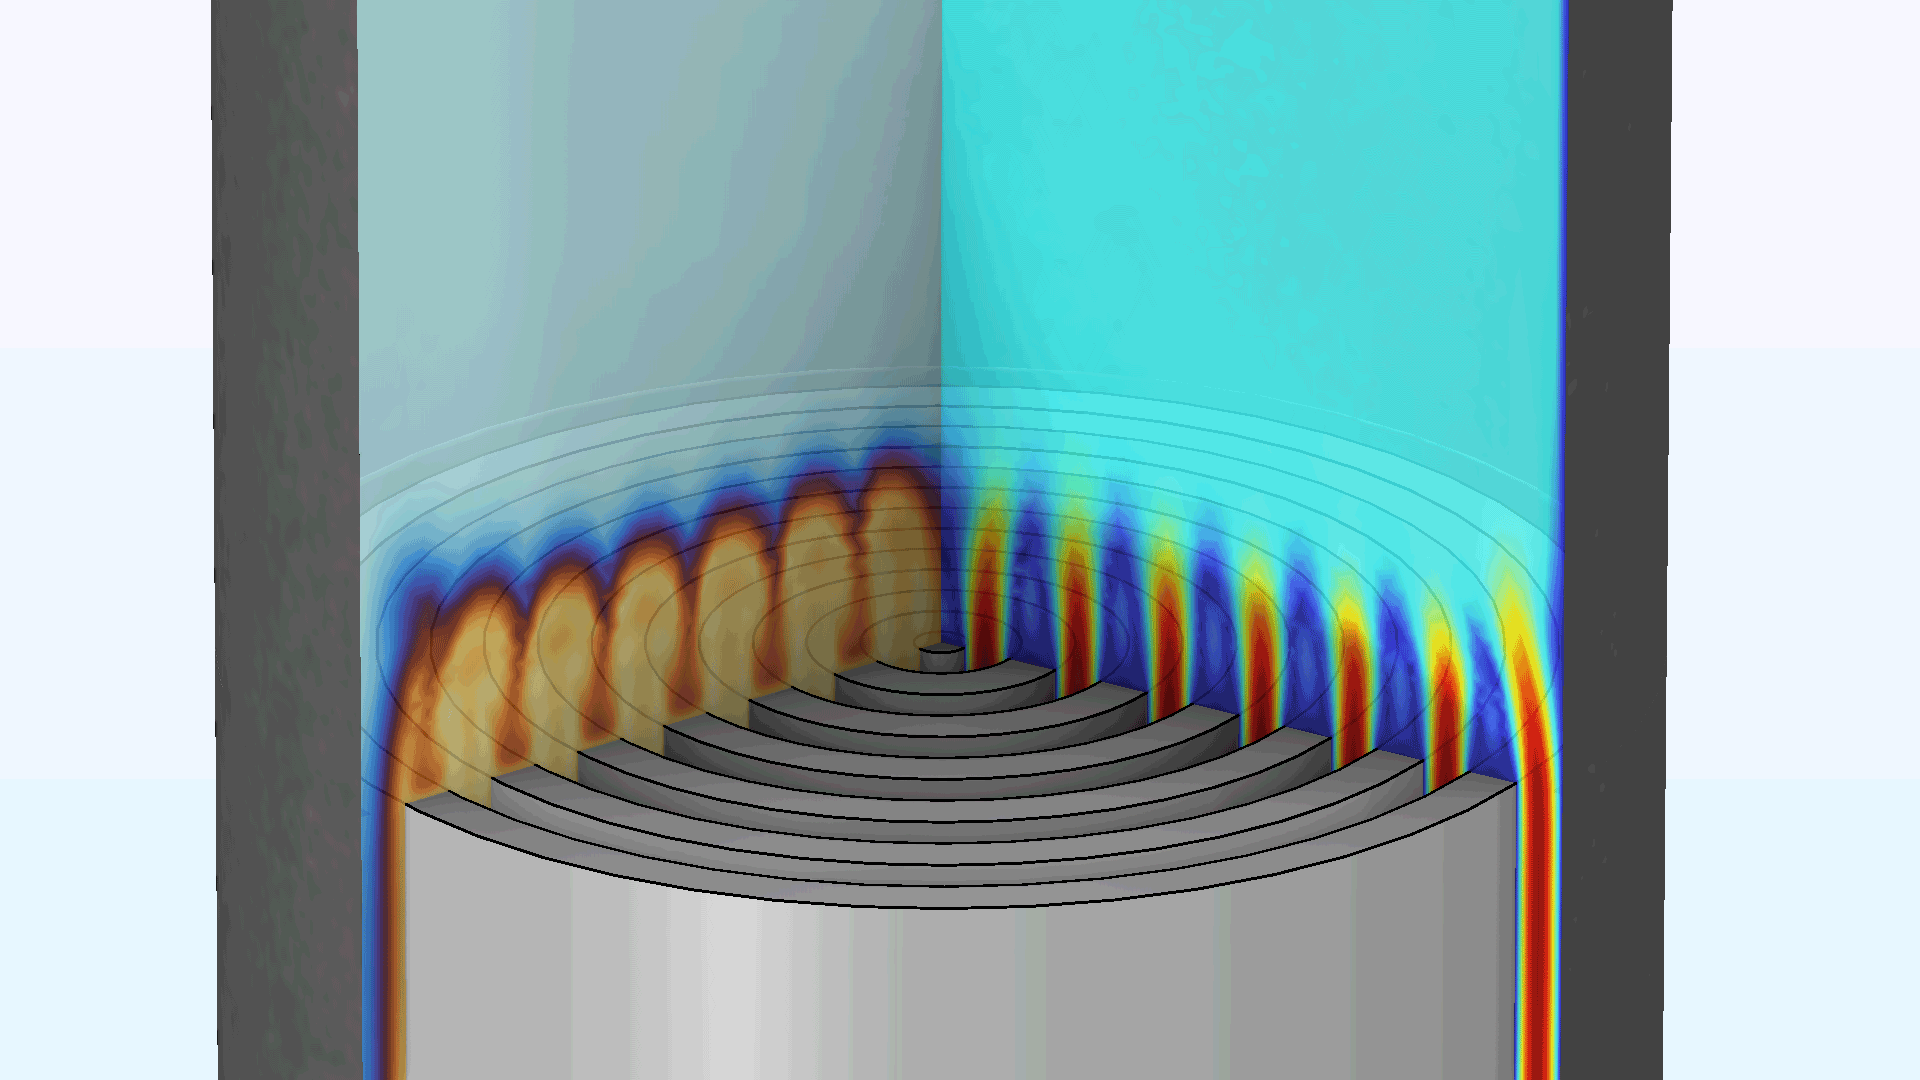 A heat exchanger model showing the acoustic velocity and temperature fluctuations in the Rainbow and Thermal Wave color tables.